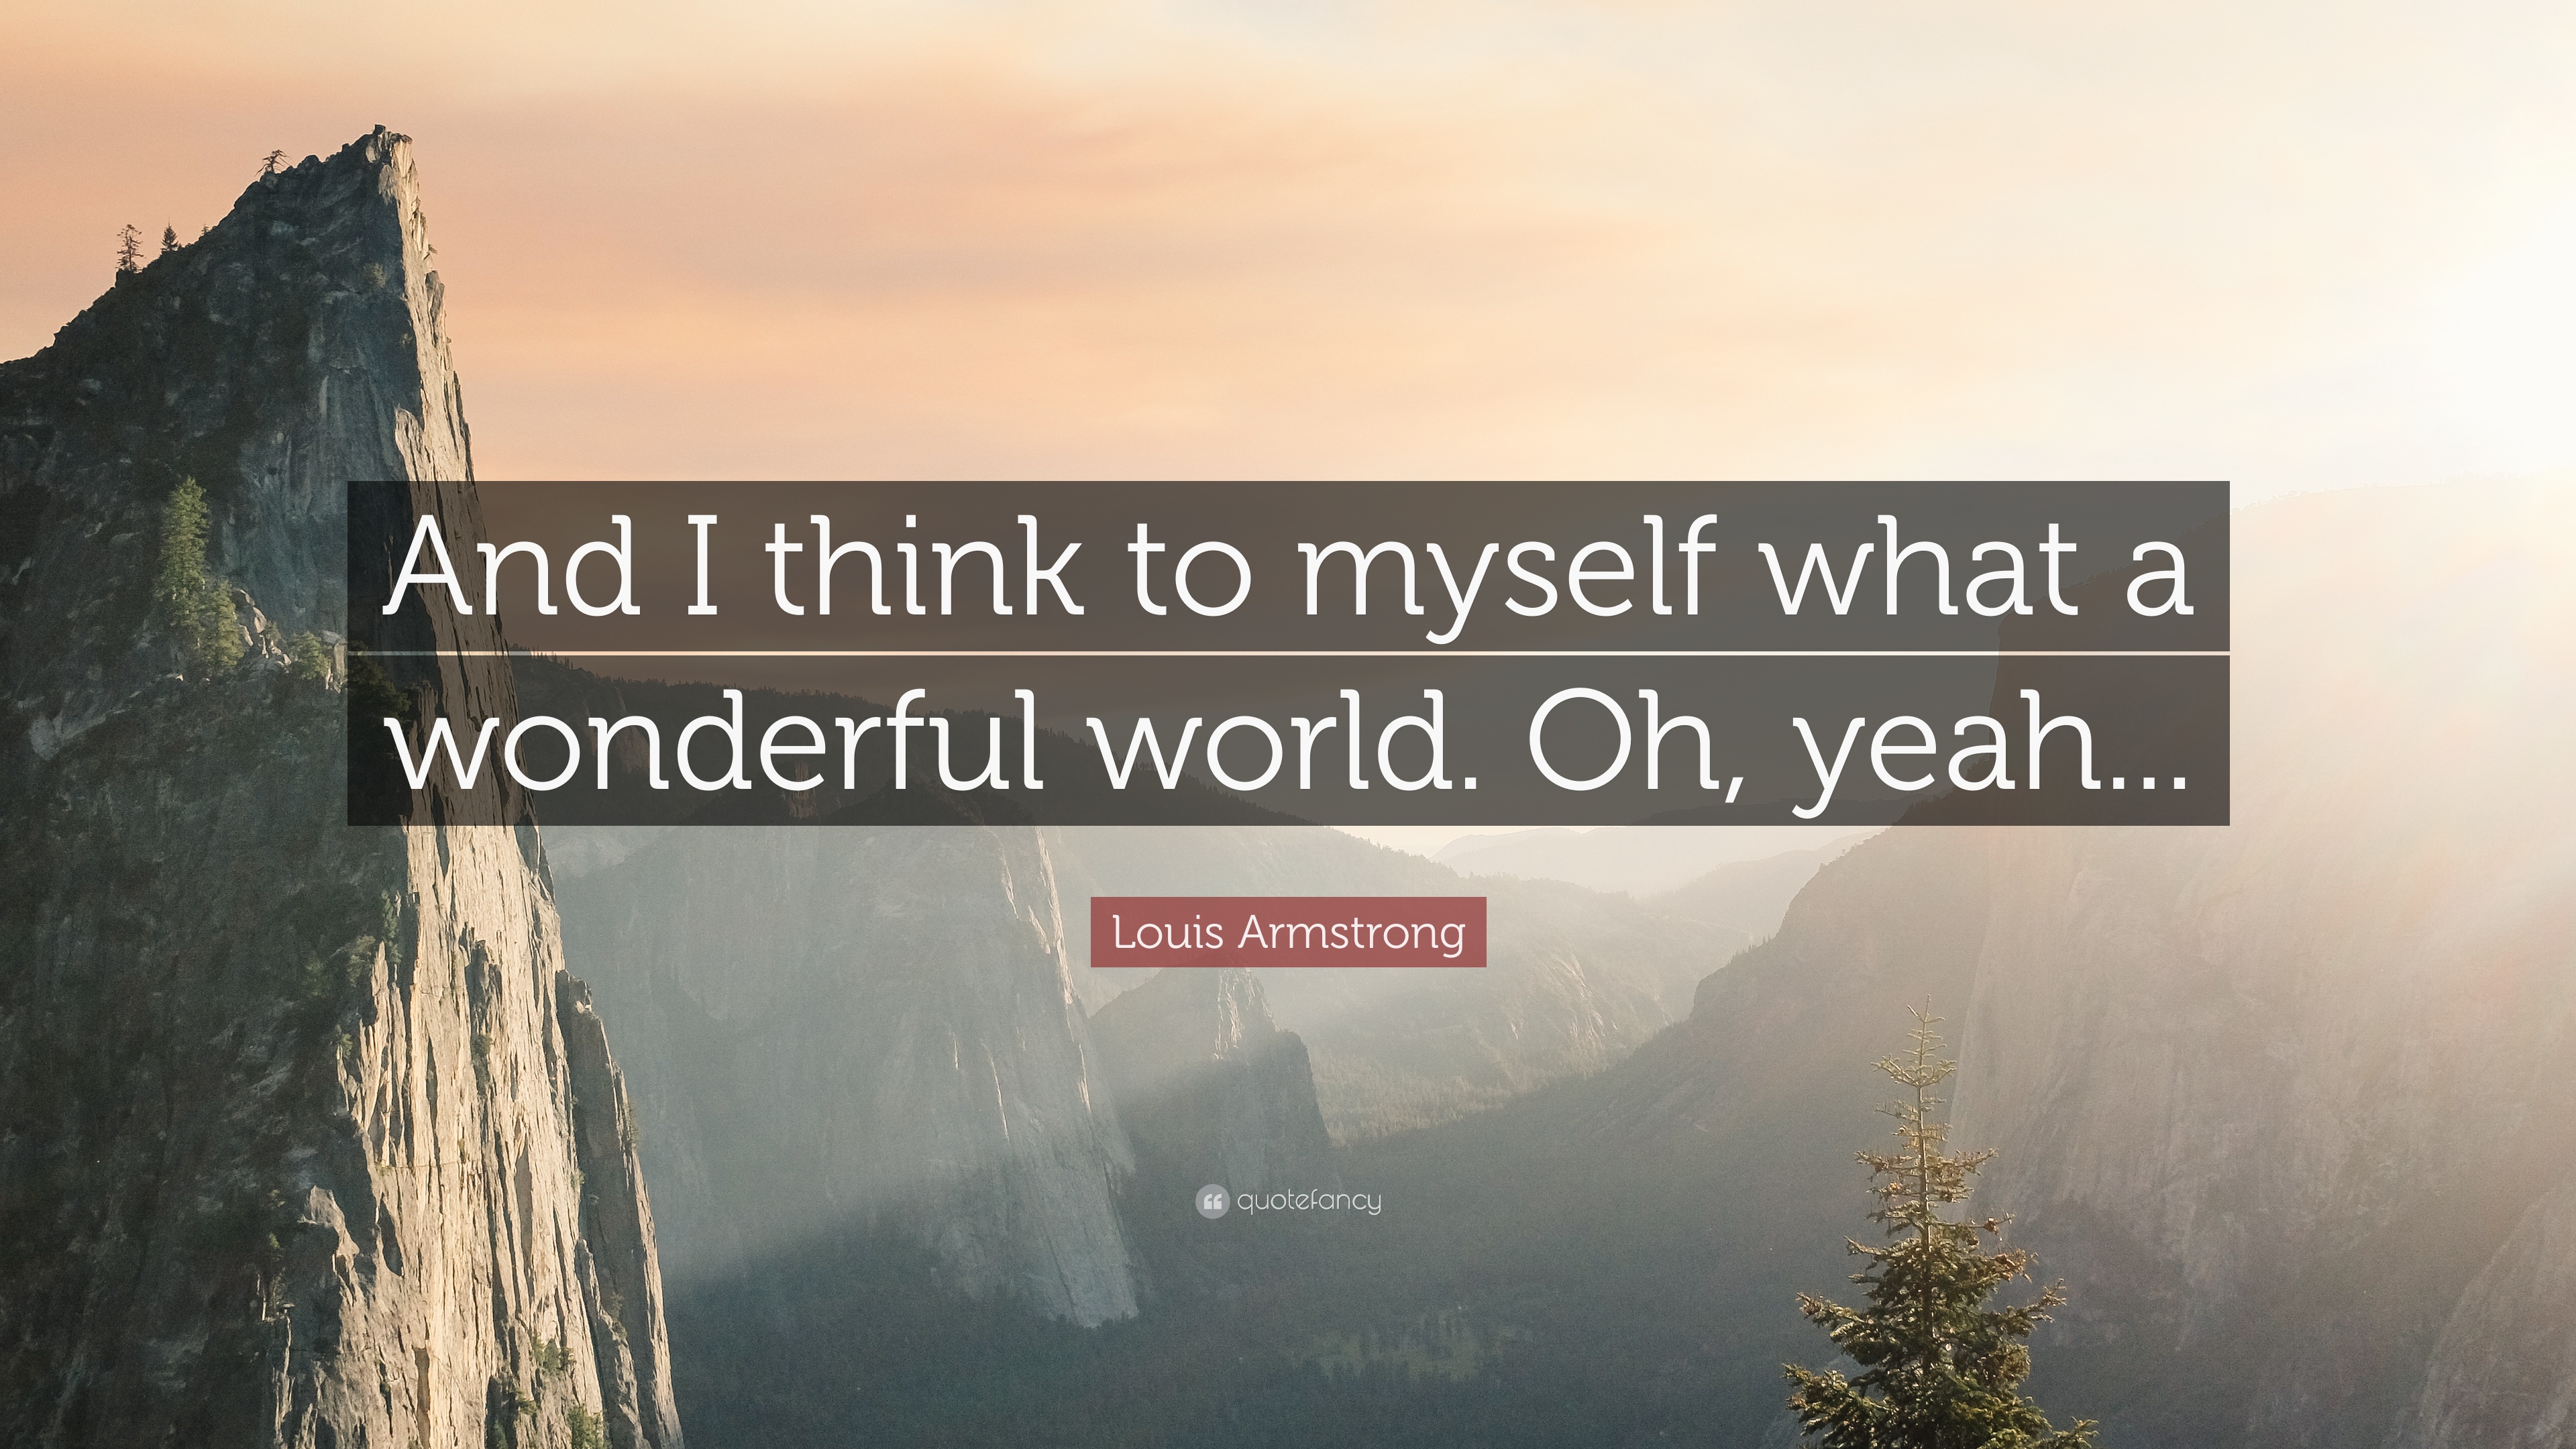 7 Inspirational Louis Armstrong Quotes